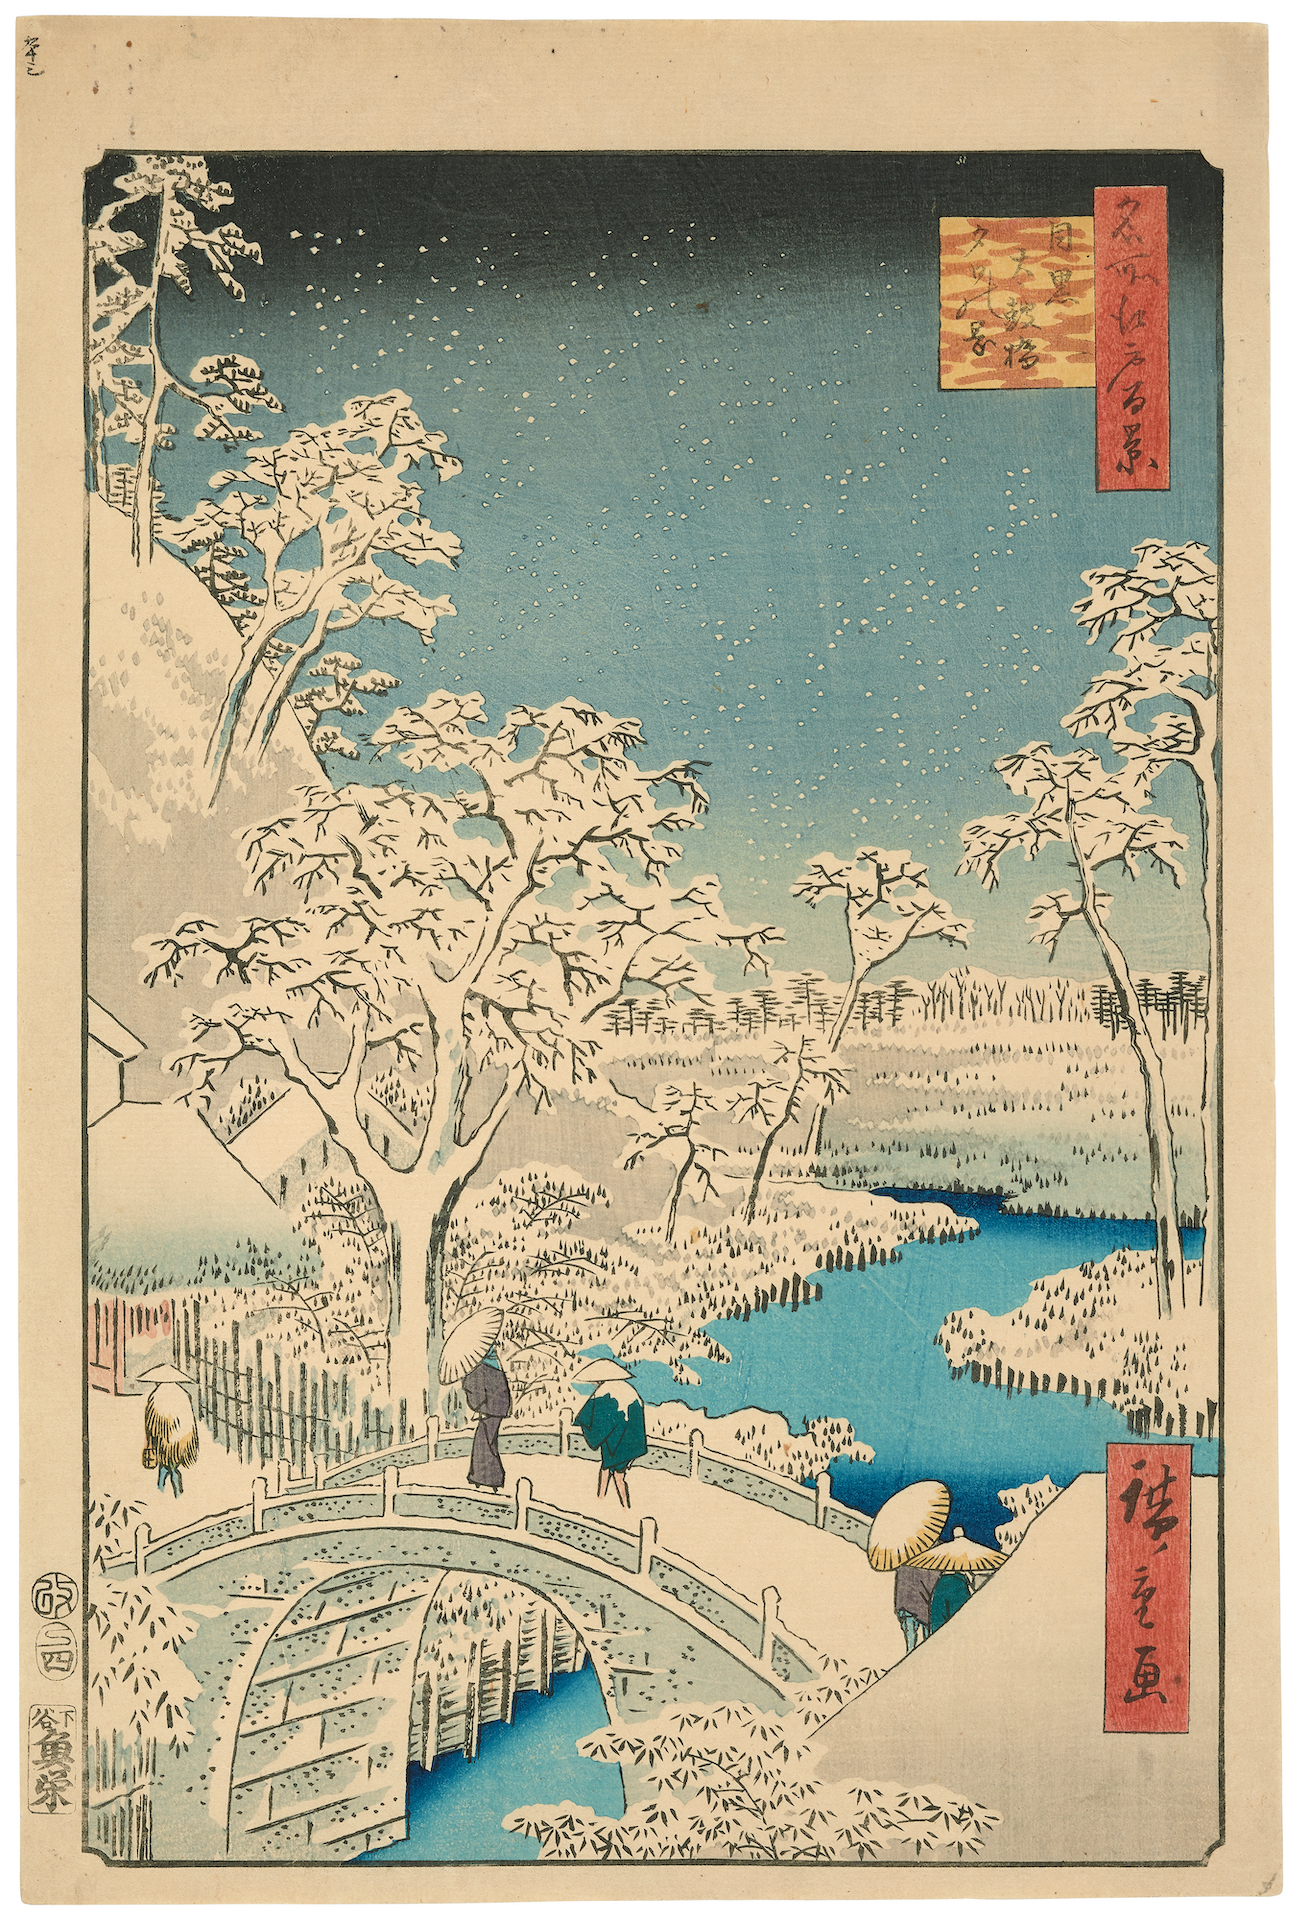 Utagawa Hiroshige (1797-1858), 'Meguro Drum Bridge and Sunset Hill', from the series 'One Hundred Famous Views of Edo', woodblock print, 1857, vertical oban: 37.1 x 24.9 cm.